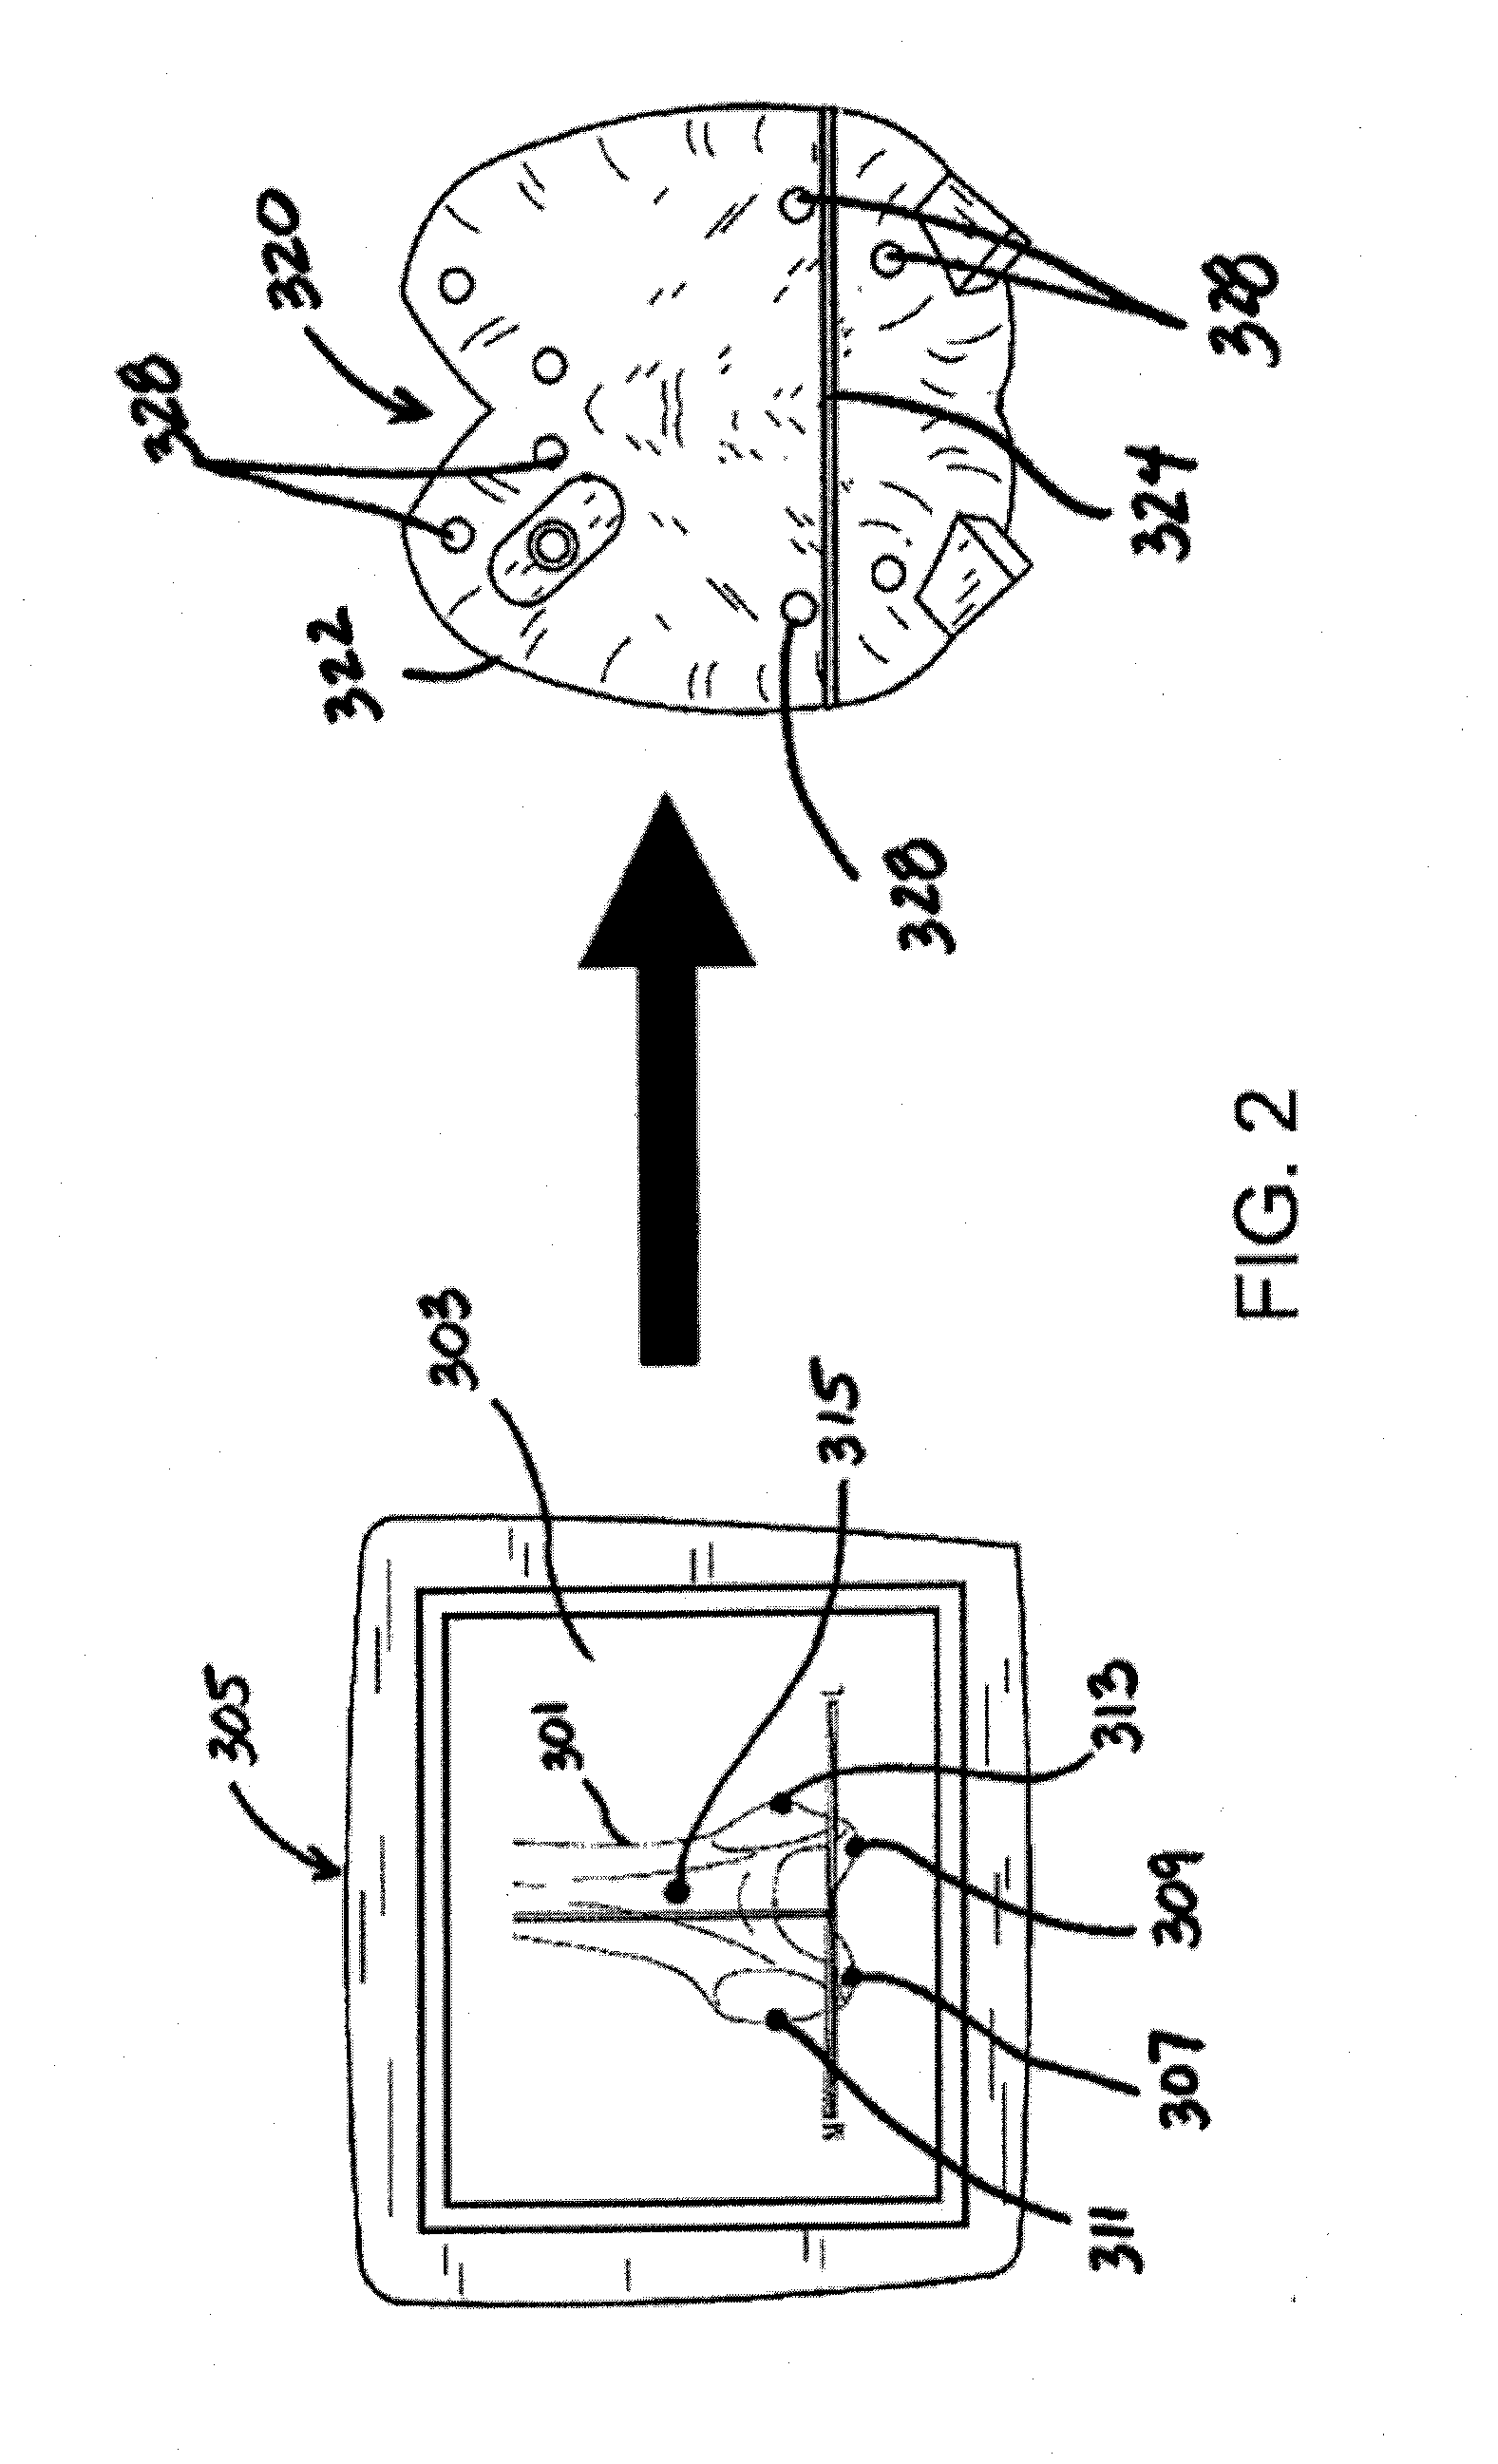 Patient-matched surgical component and methods of use